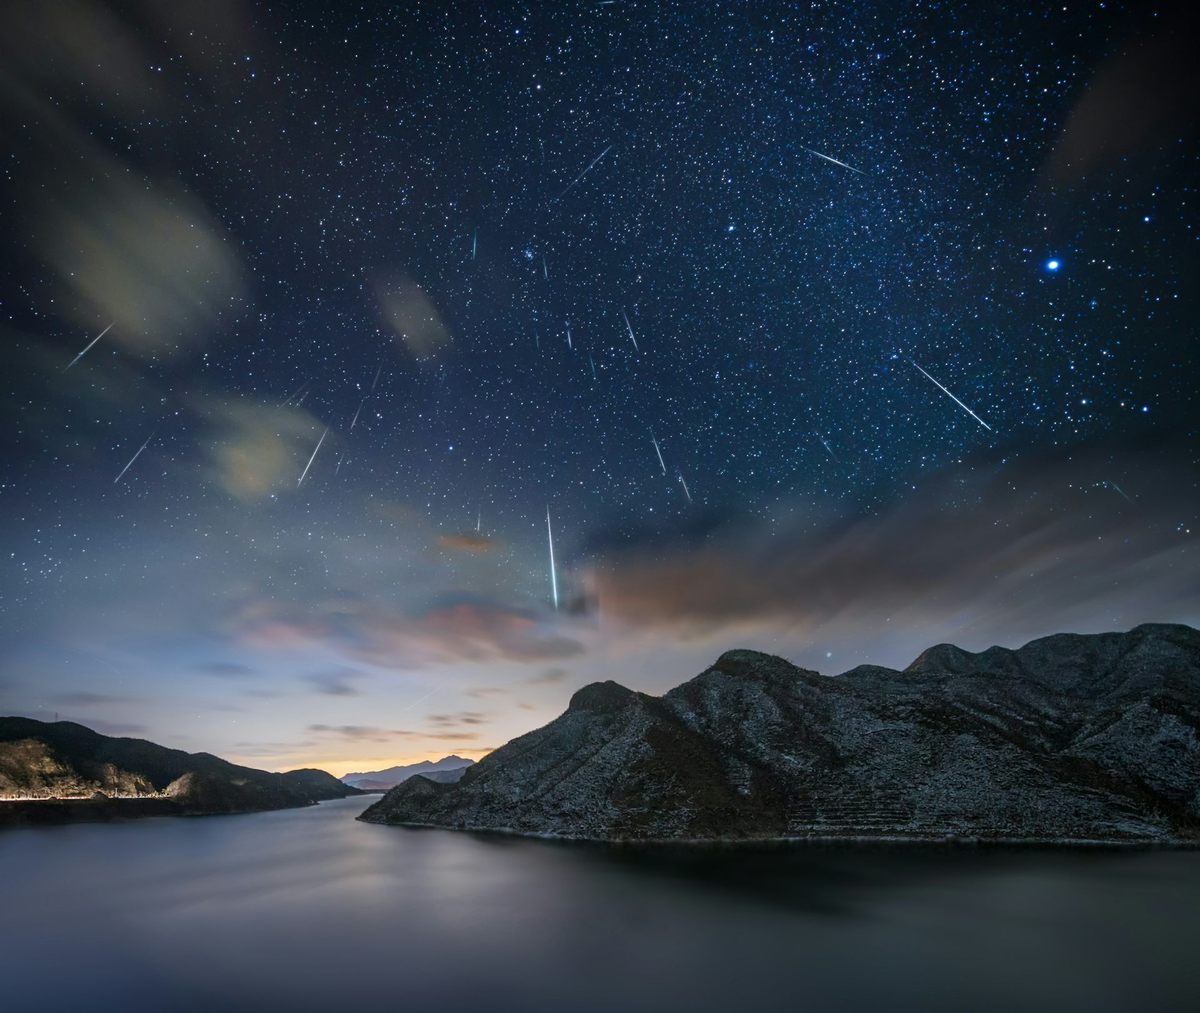 Meteor showers happen around the same time each year and on clear nights can be stunning to watch.